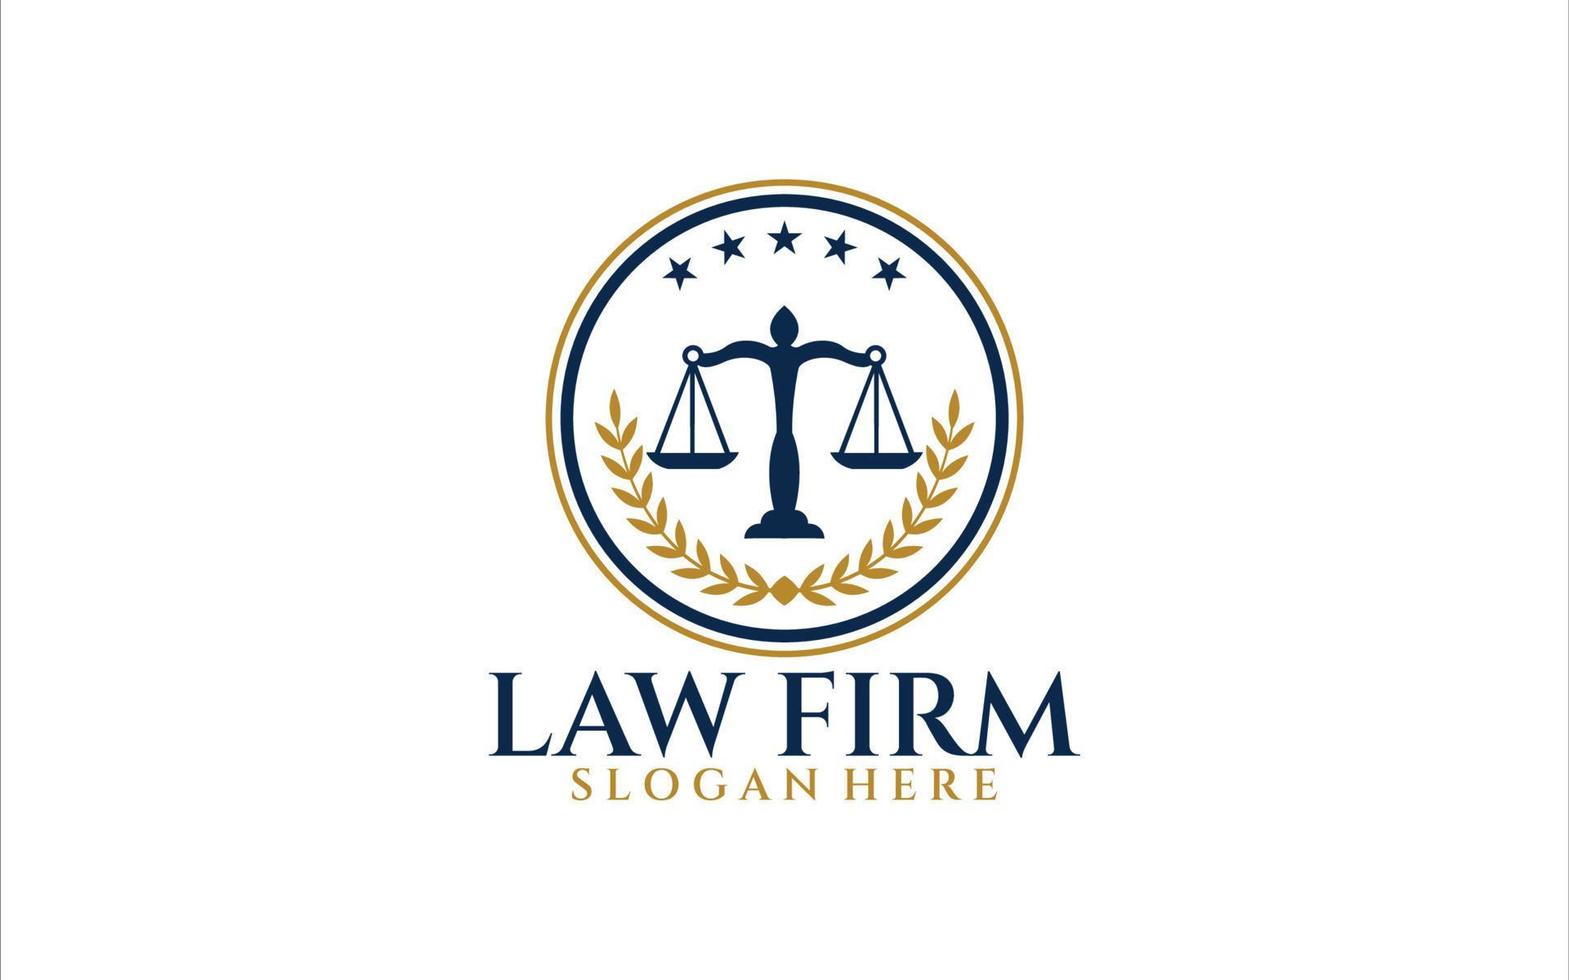 Justice Law firm Logo design template vector